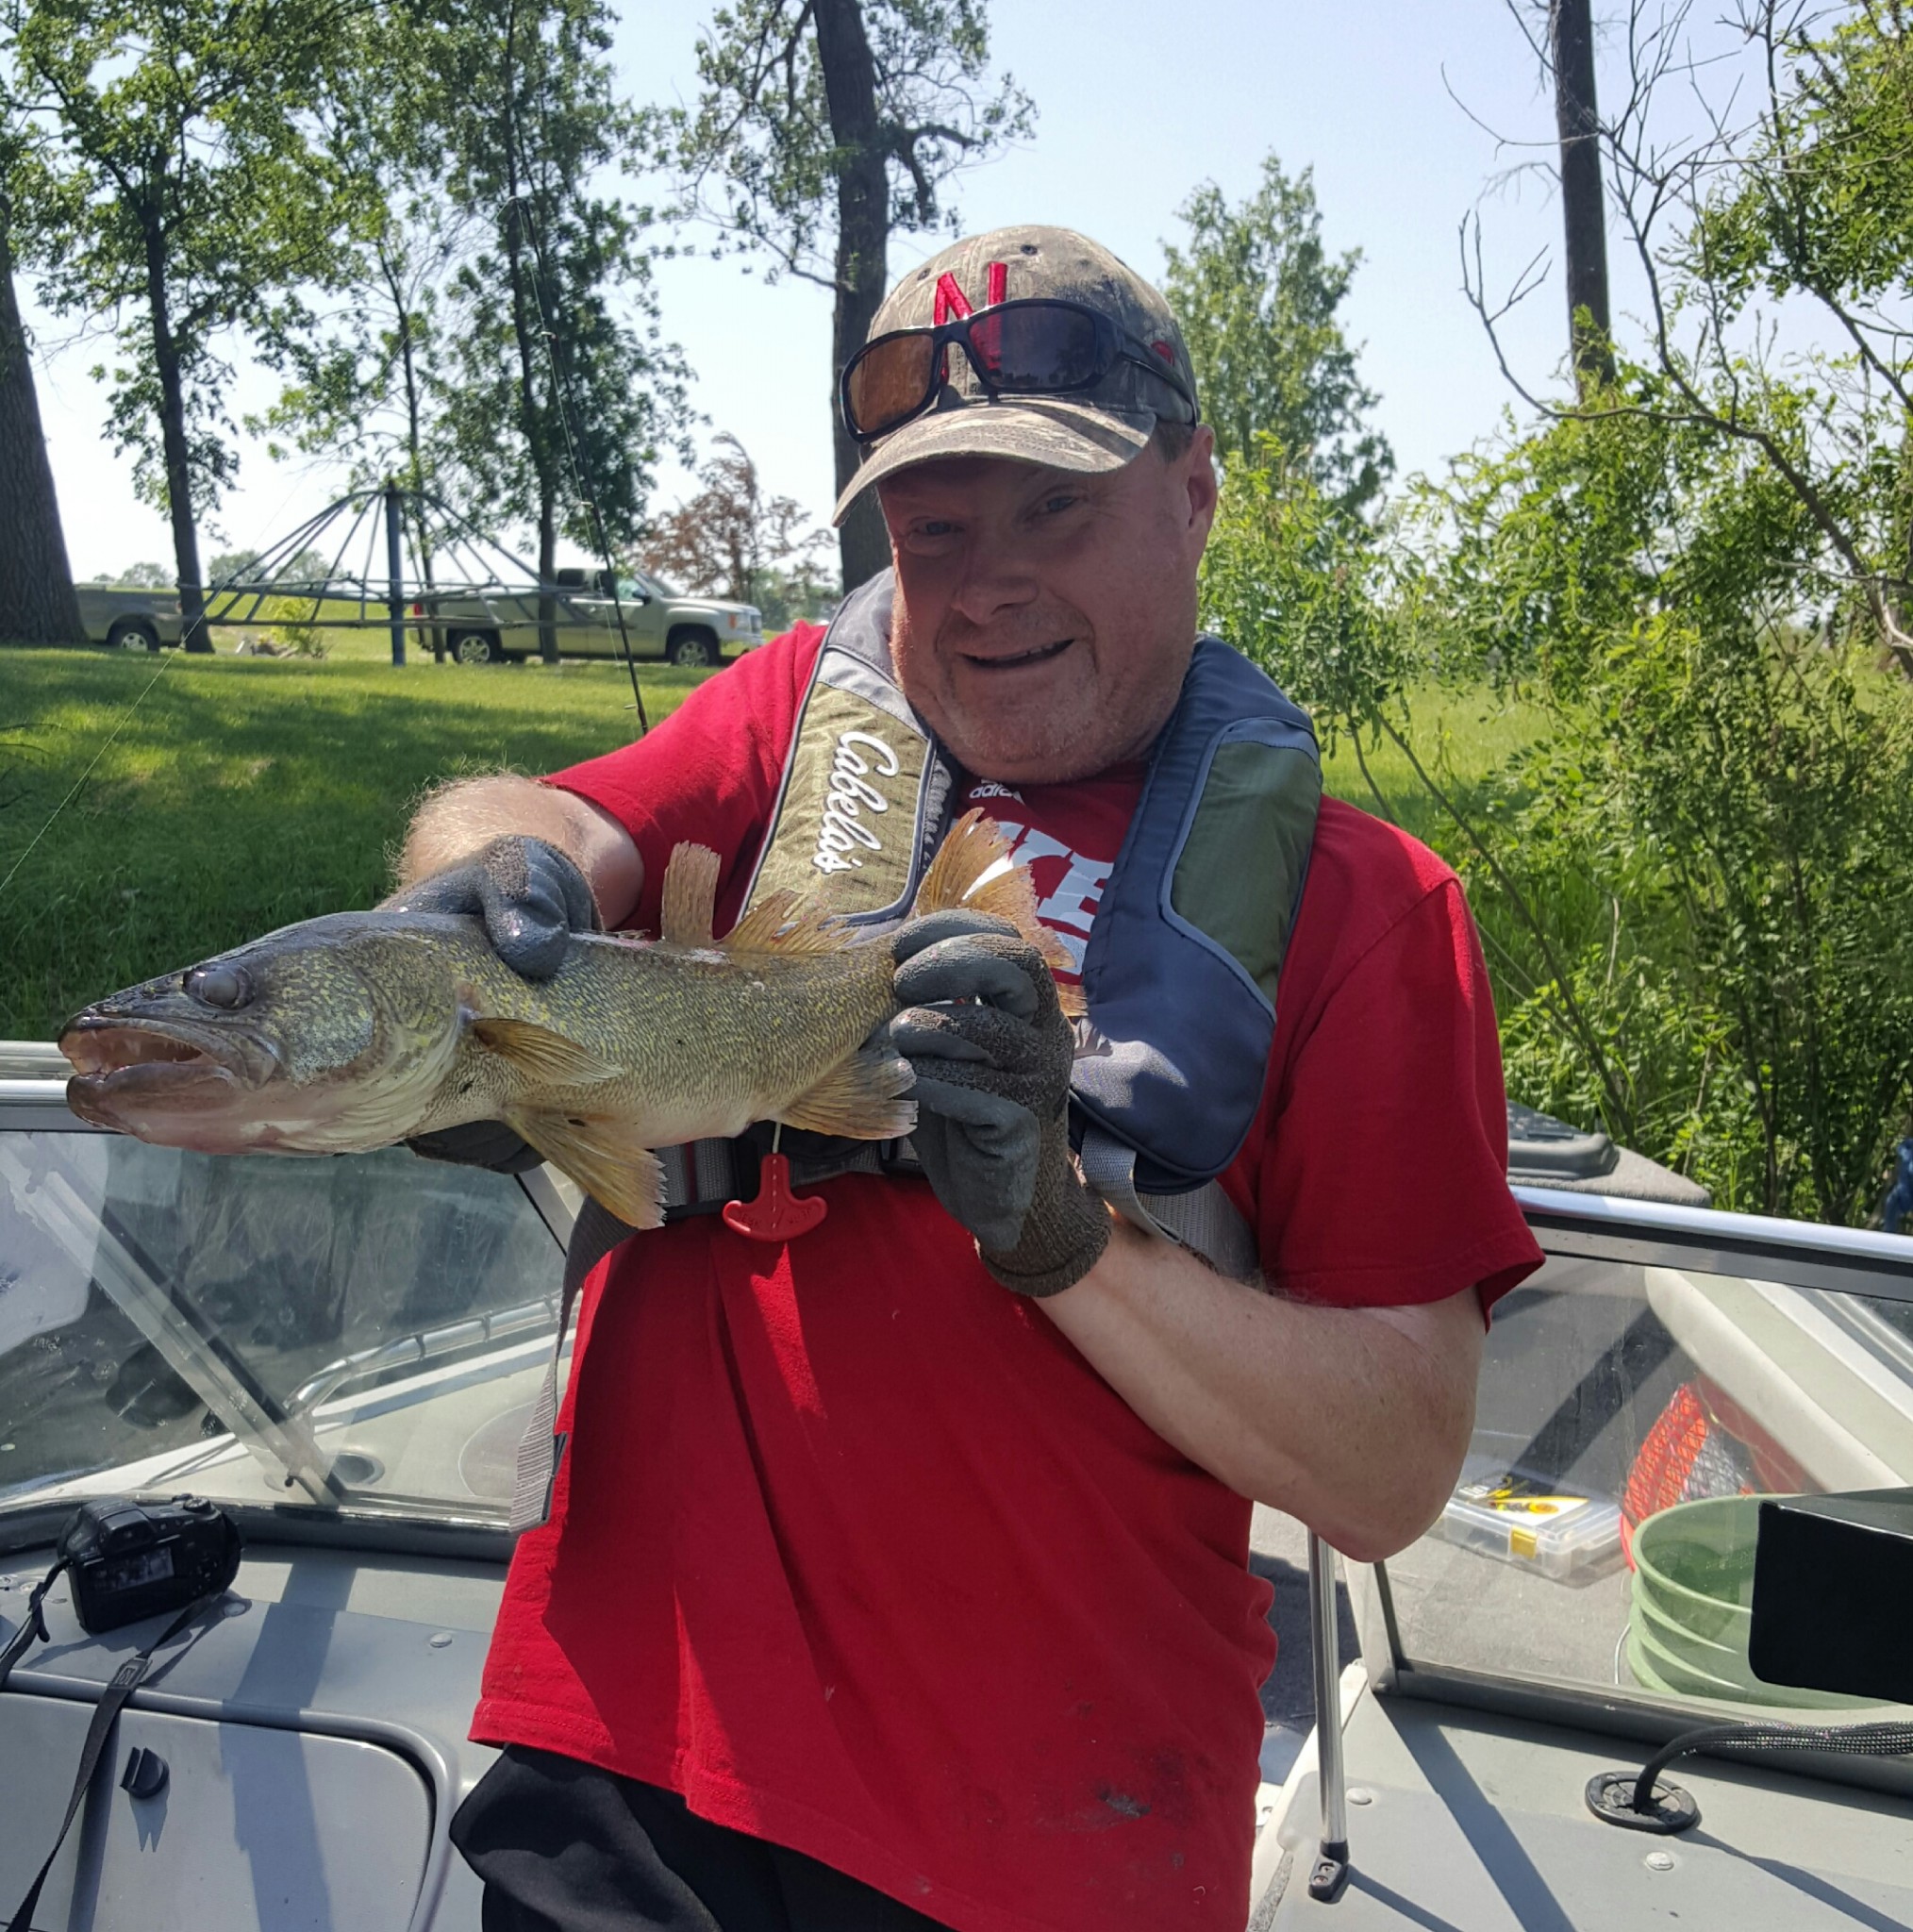 Greg Wagner, wearing rubber fish handling gloves, poses quickly with a walleye he caught before releasing it back into the water. Photo by Rich Berggren.